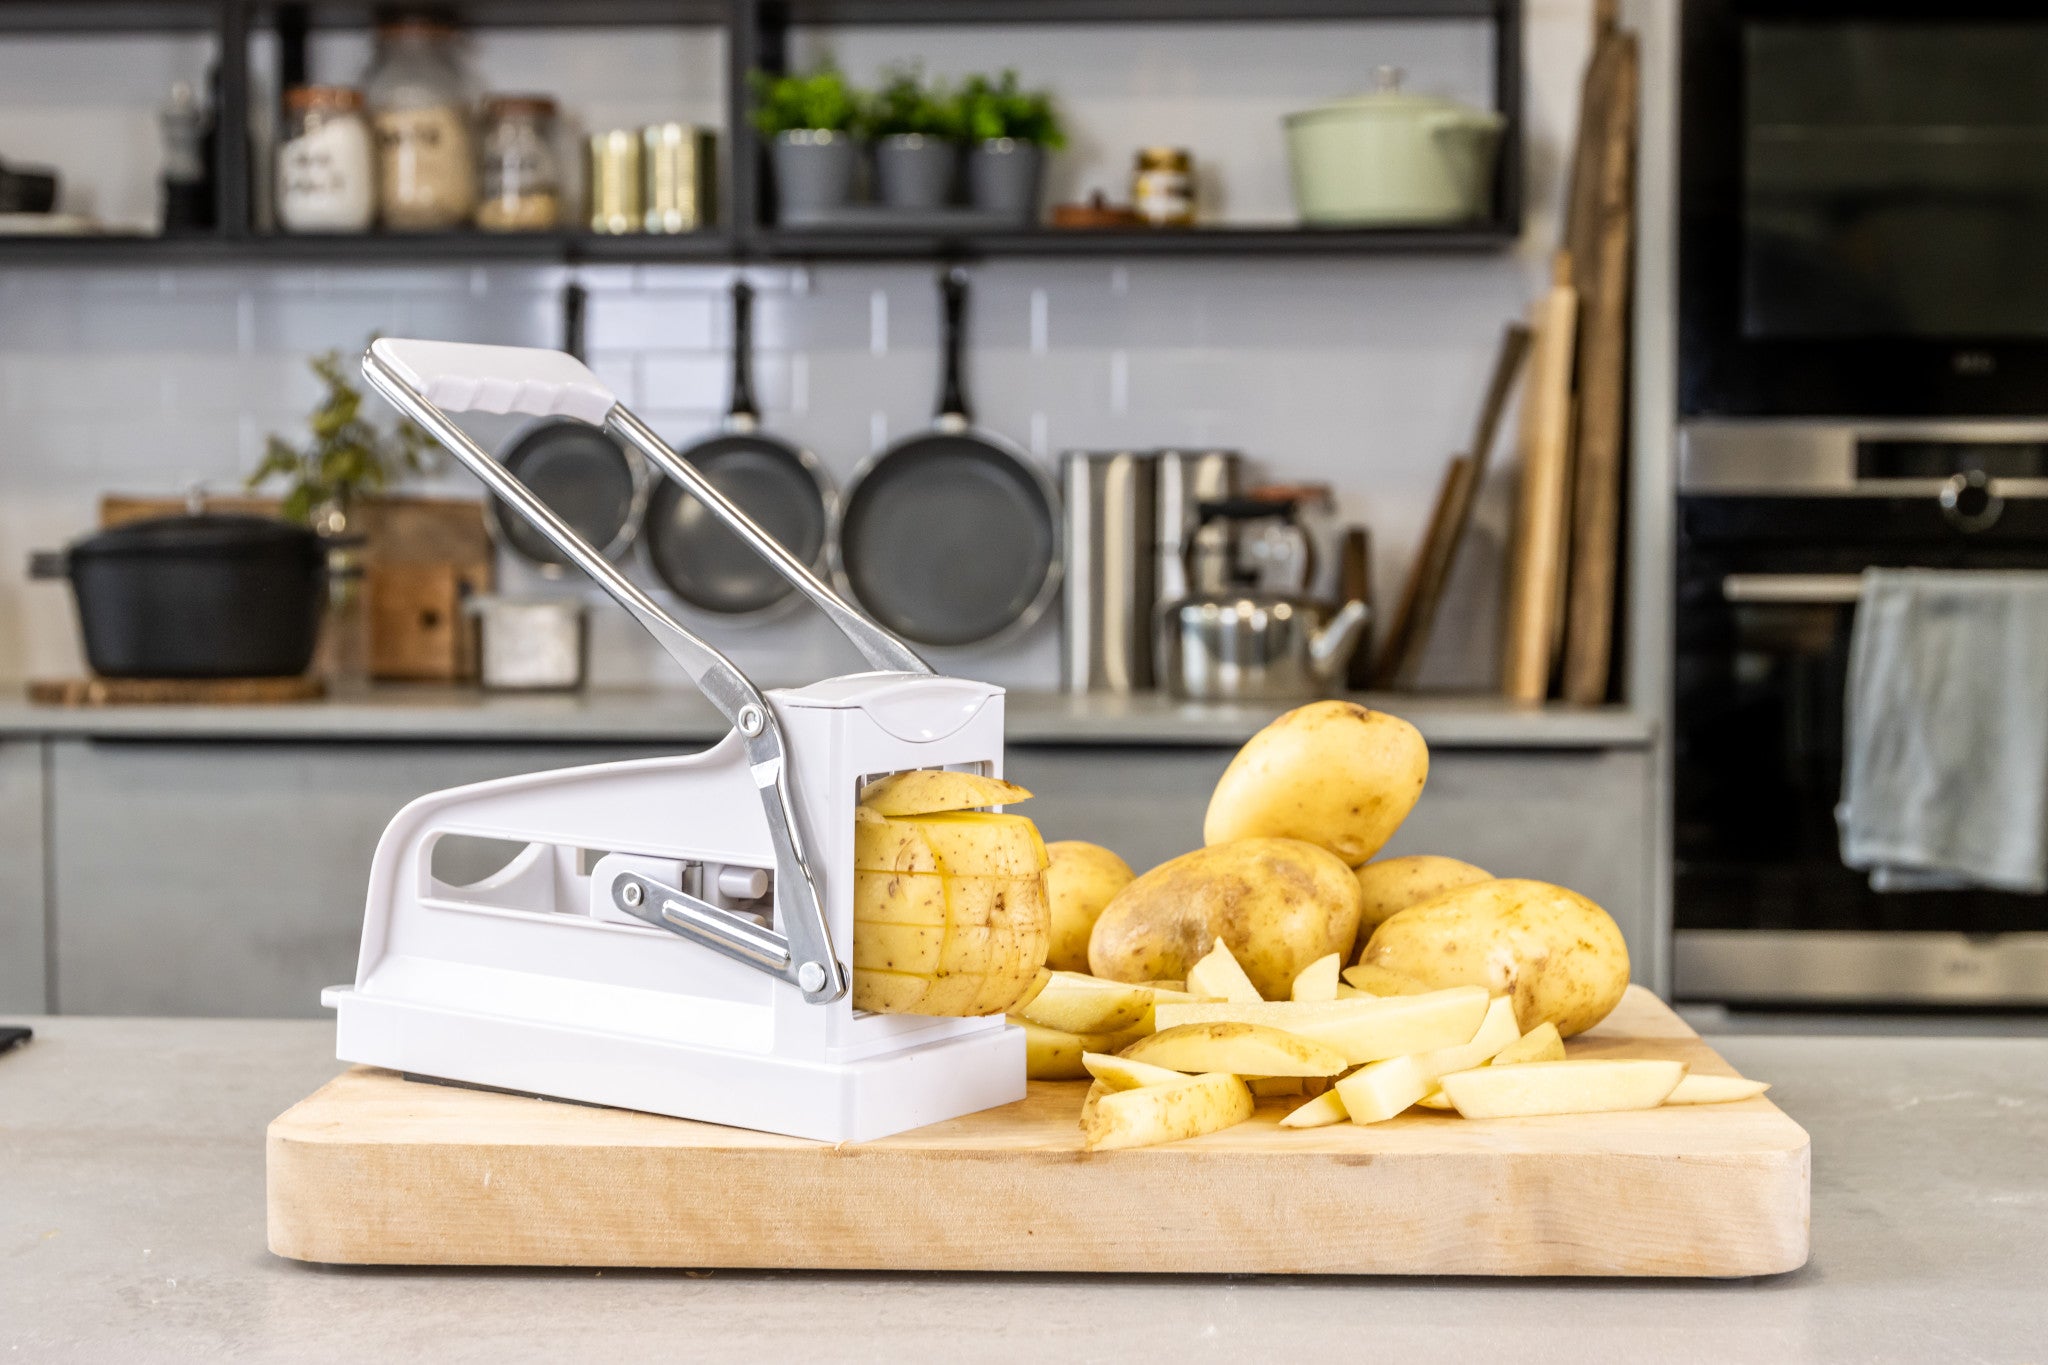  KitchenCraft Potato Chipper, French Fry Vegetable Cutter/Dicer  Machine, Includes 2 Size of Blades, 5(H) x 10(W) x 5 1/2(L)/ 130x 255x  140mm, White: Home & Kitchen